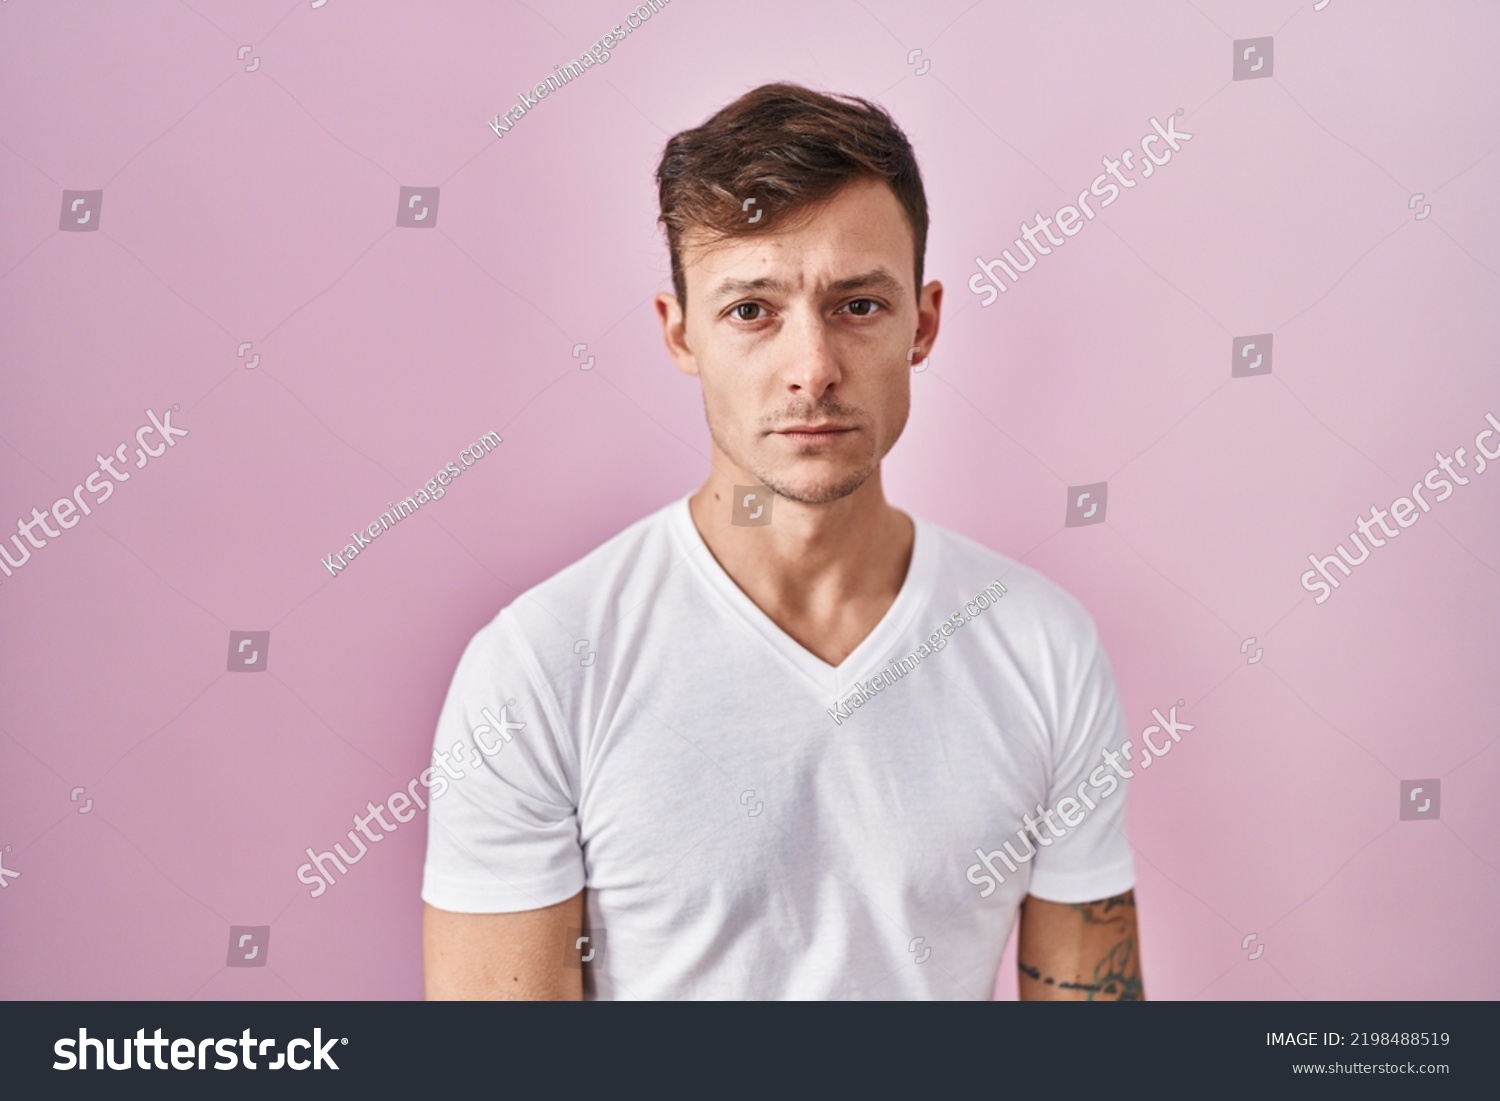 Caucasian man standing over pink background depressed and worry for distress, crying angry and afraid. sad expression.  #2198488519